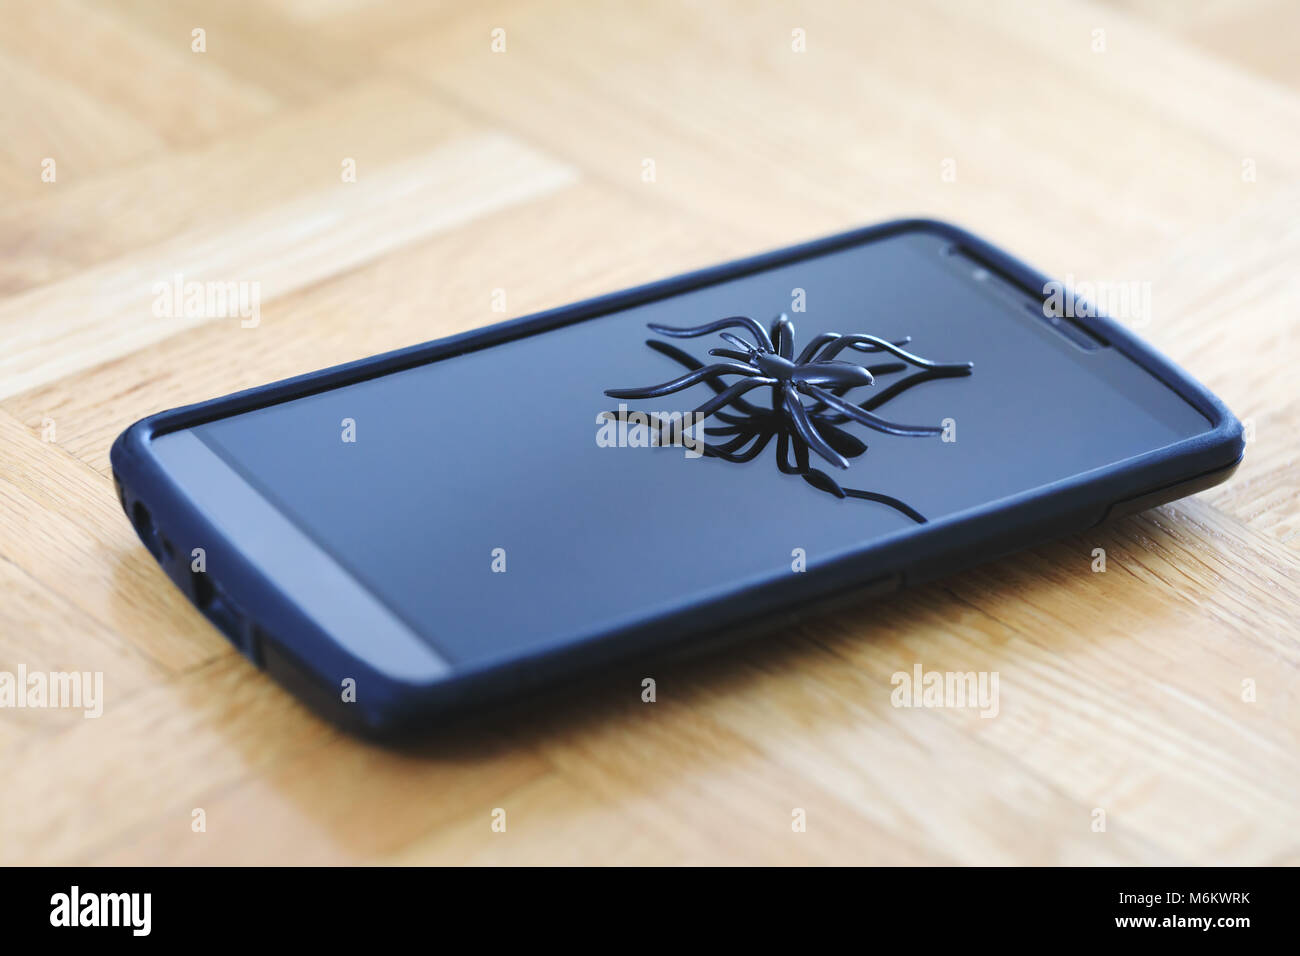 Great spider toy posing on surface of cellphone. Plastic spider model toy in action of running on surface of device display. Telecommunications. Stock Photo